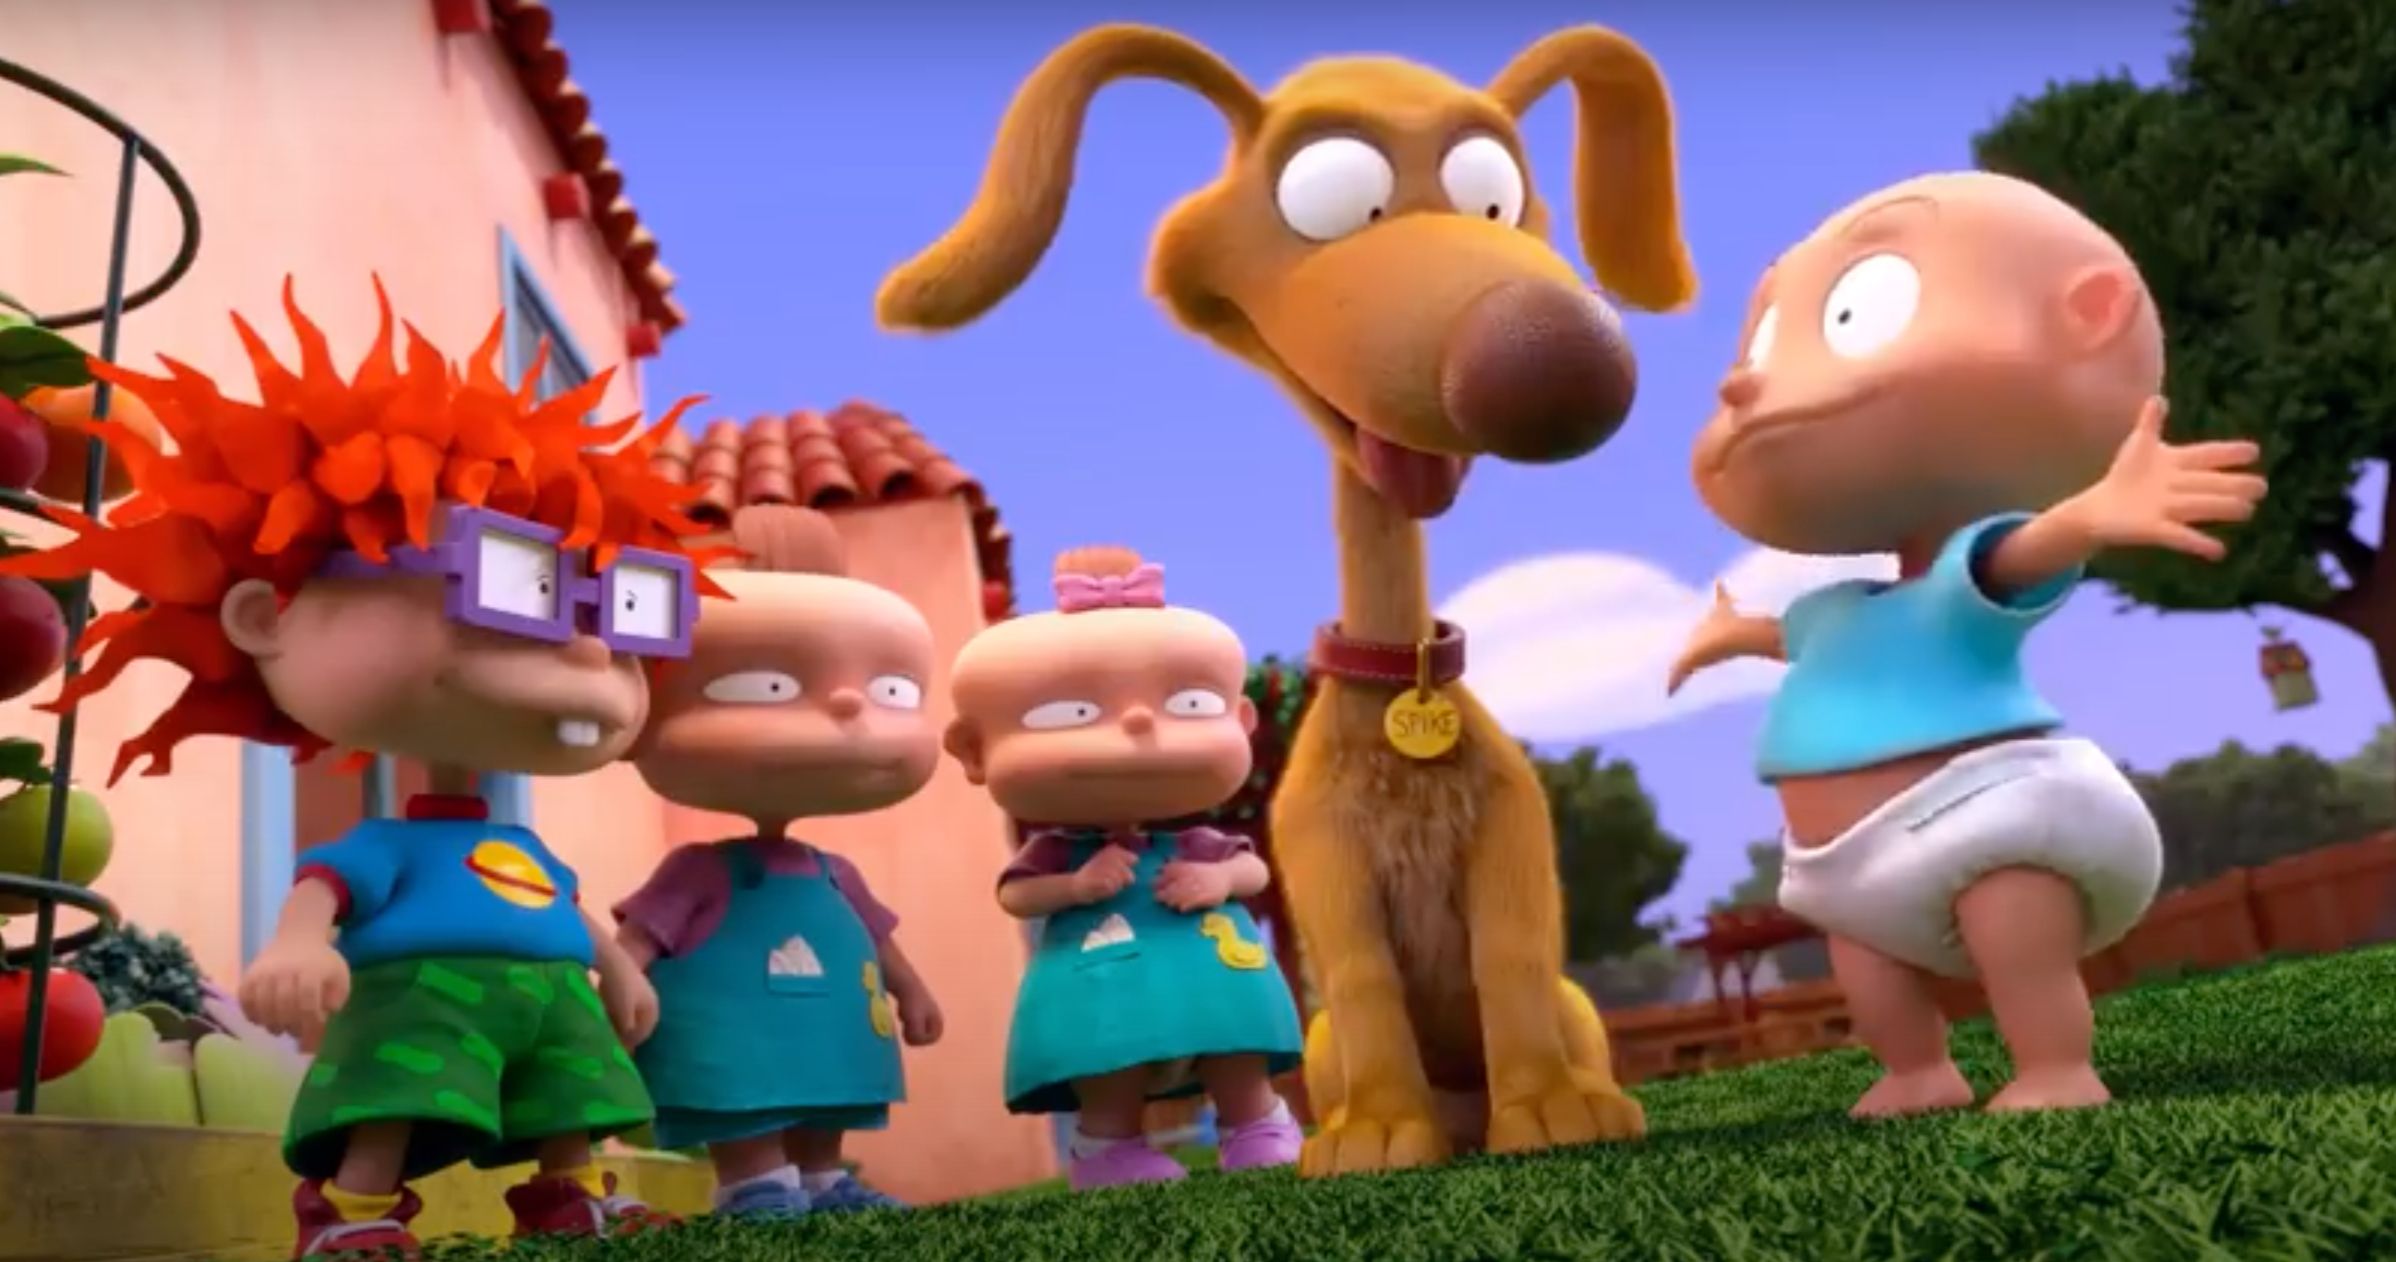 Rugrats Reboot Trailer Arrives Ahead of Paramount+ Debut Later This Month